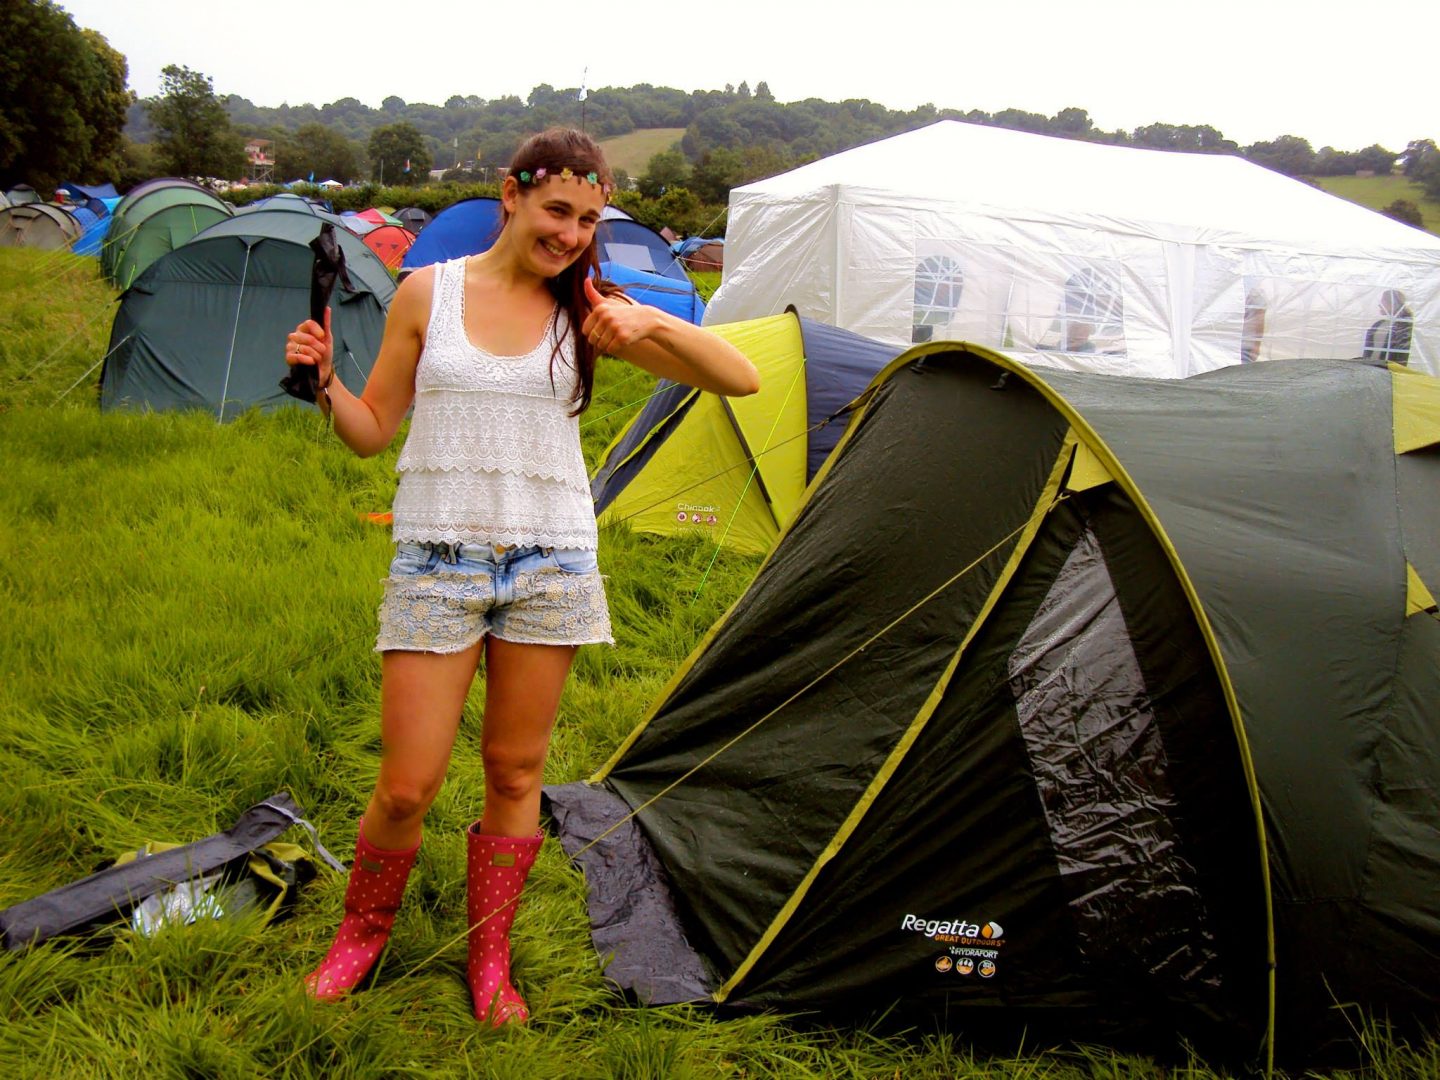 Pitching our tent at Glastonbury Festival